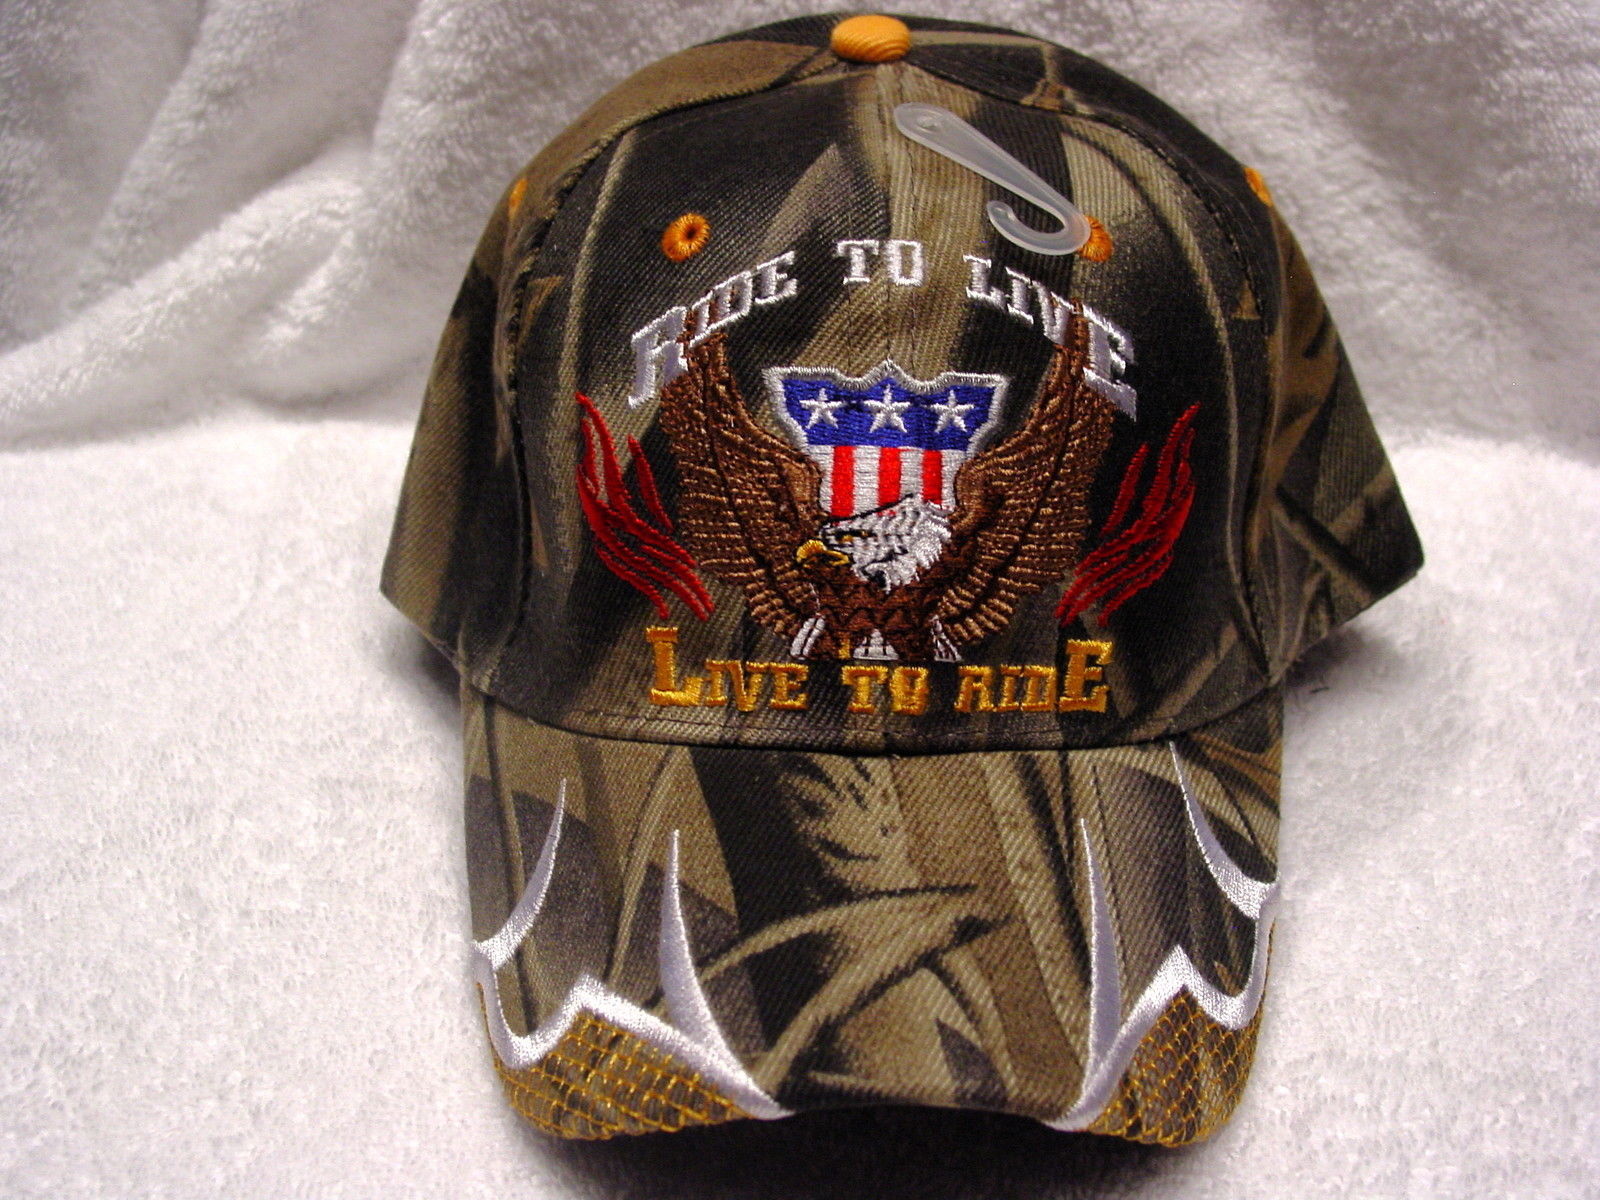 EAGLE FLAG BIKER RIDE TO LIVE, LIVE TO RIDE BASEBALL CAP ( CAMOUFLAGE ) - $11.29